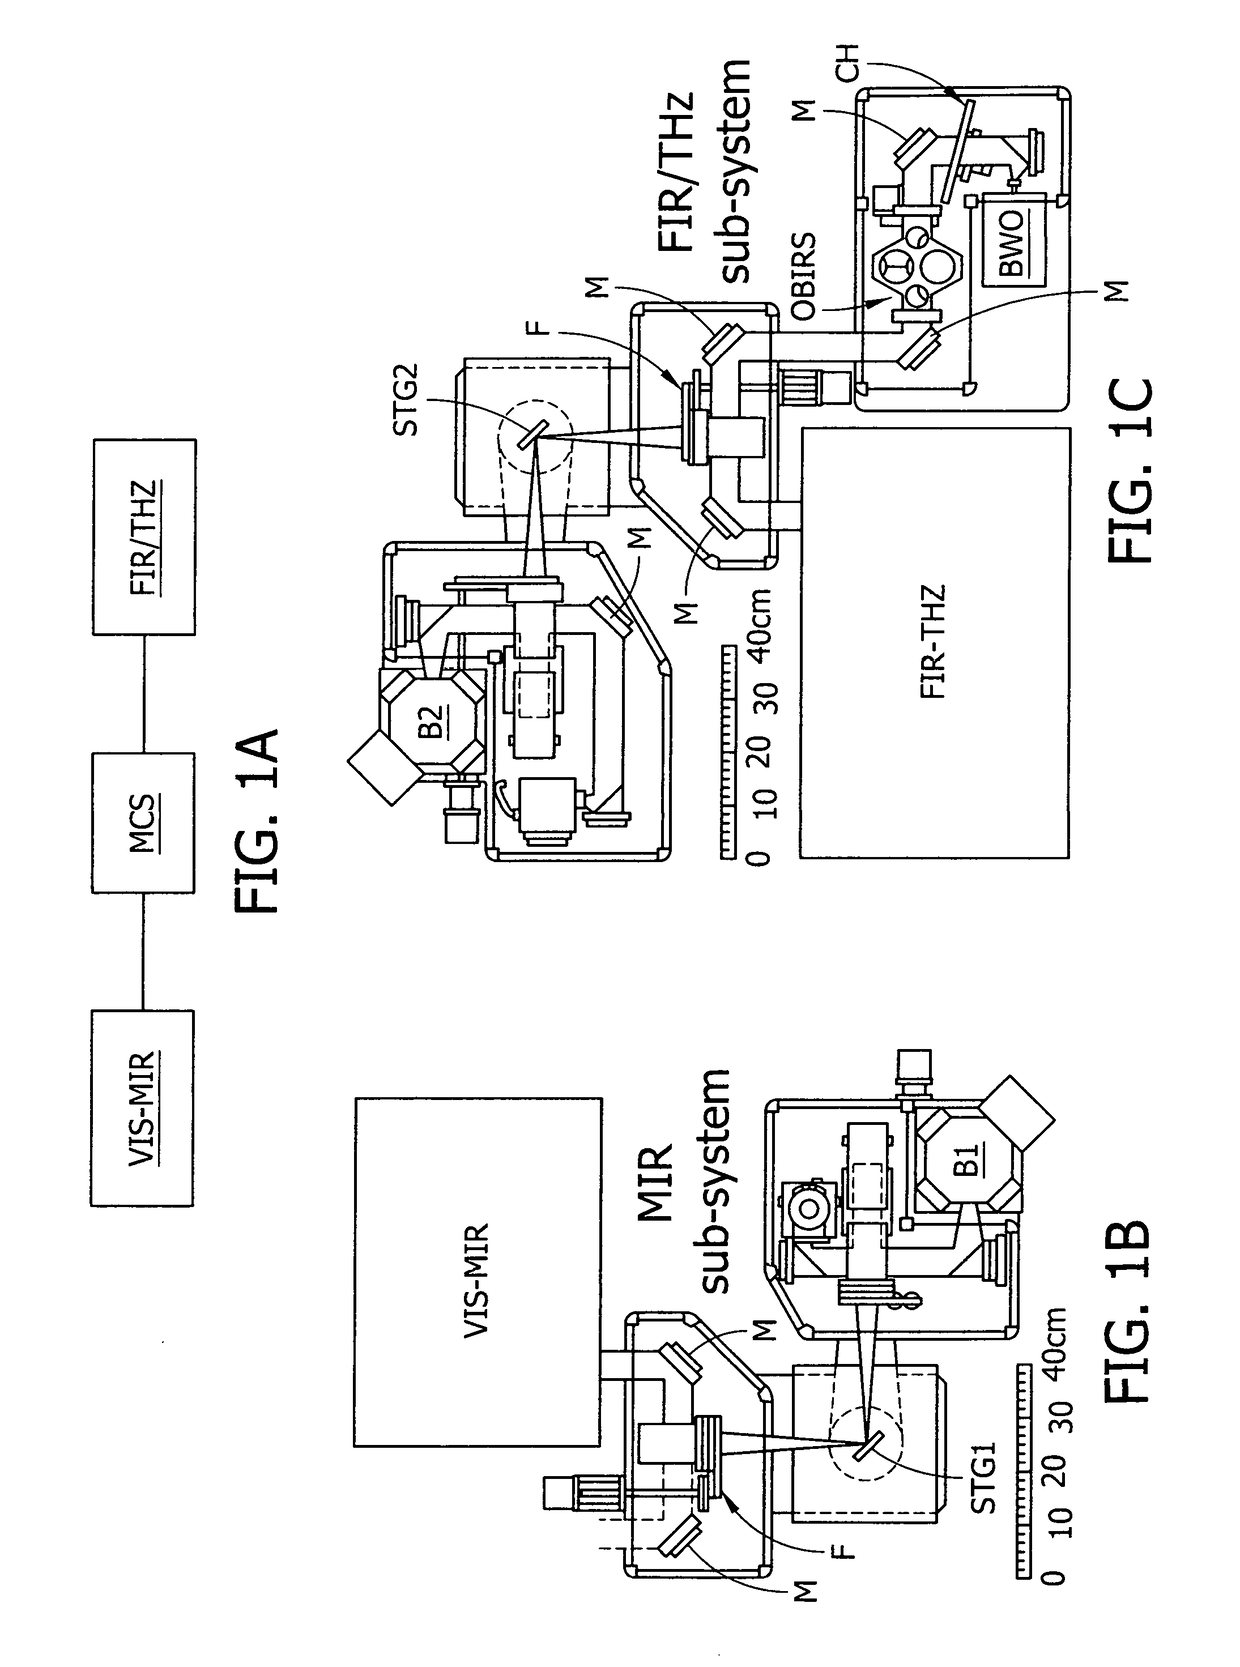 Integrated vacuum-ultraviolet, mid and near-ultraviolet, visible, near, mid and far infrared and terahertz optical hall effect (OHE) instrument, and method of use